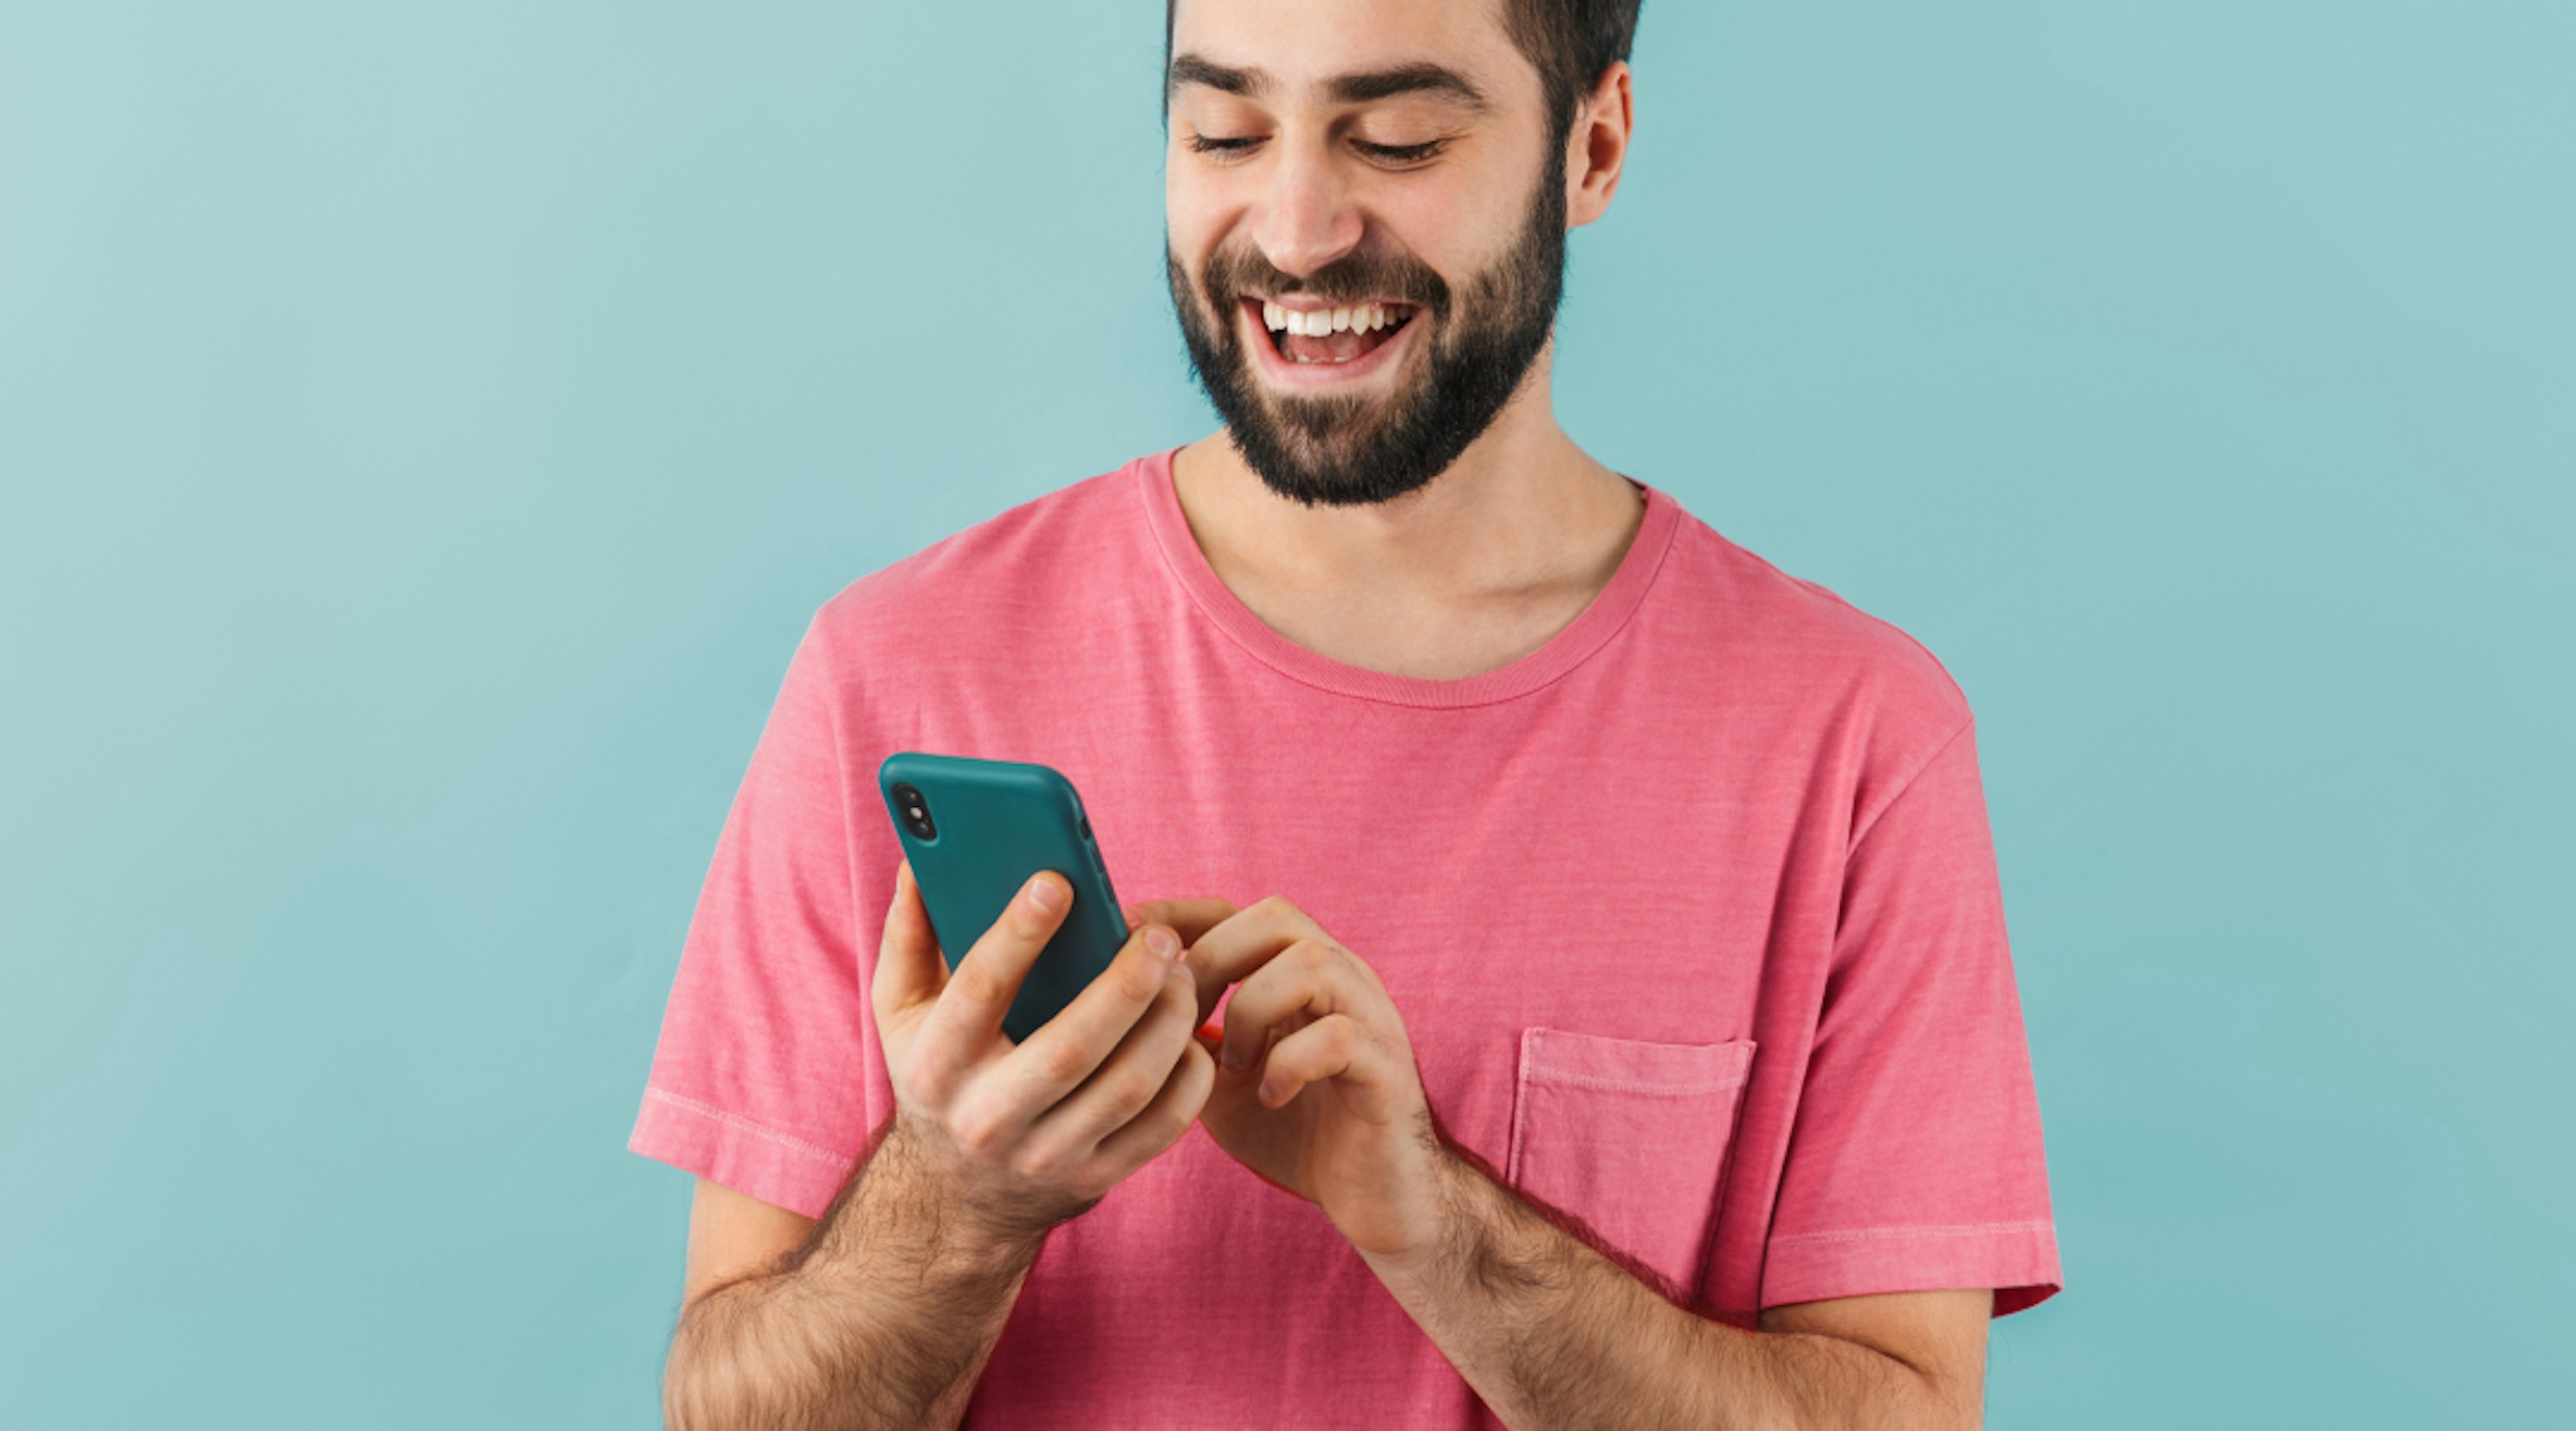 Man using phone and looking happy